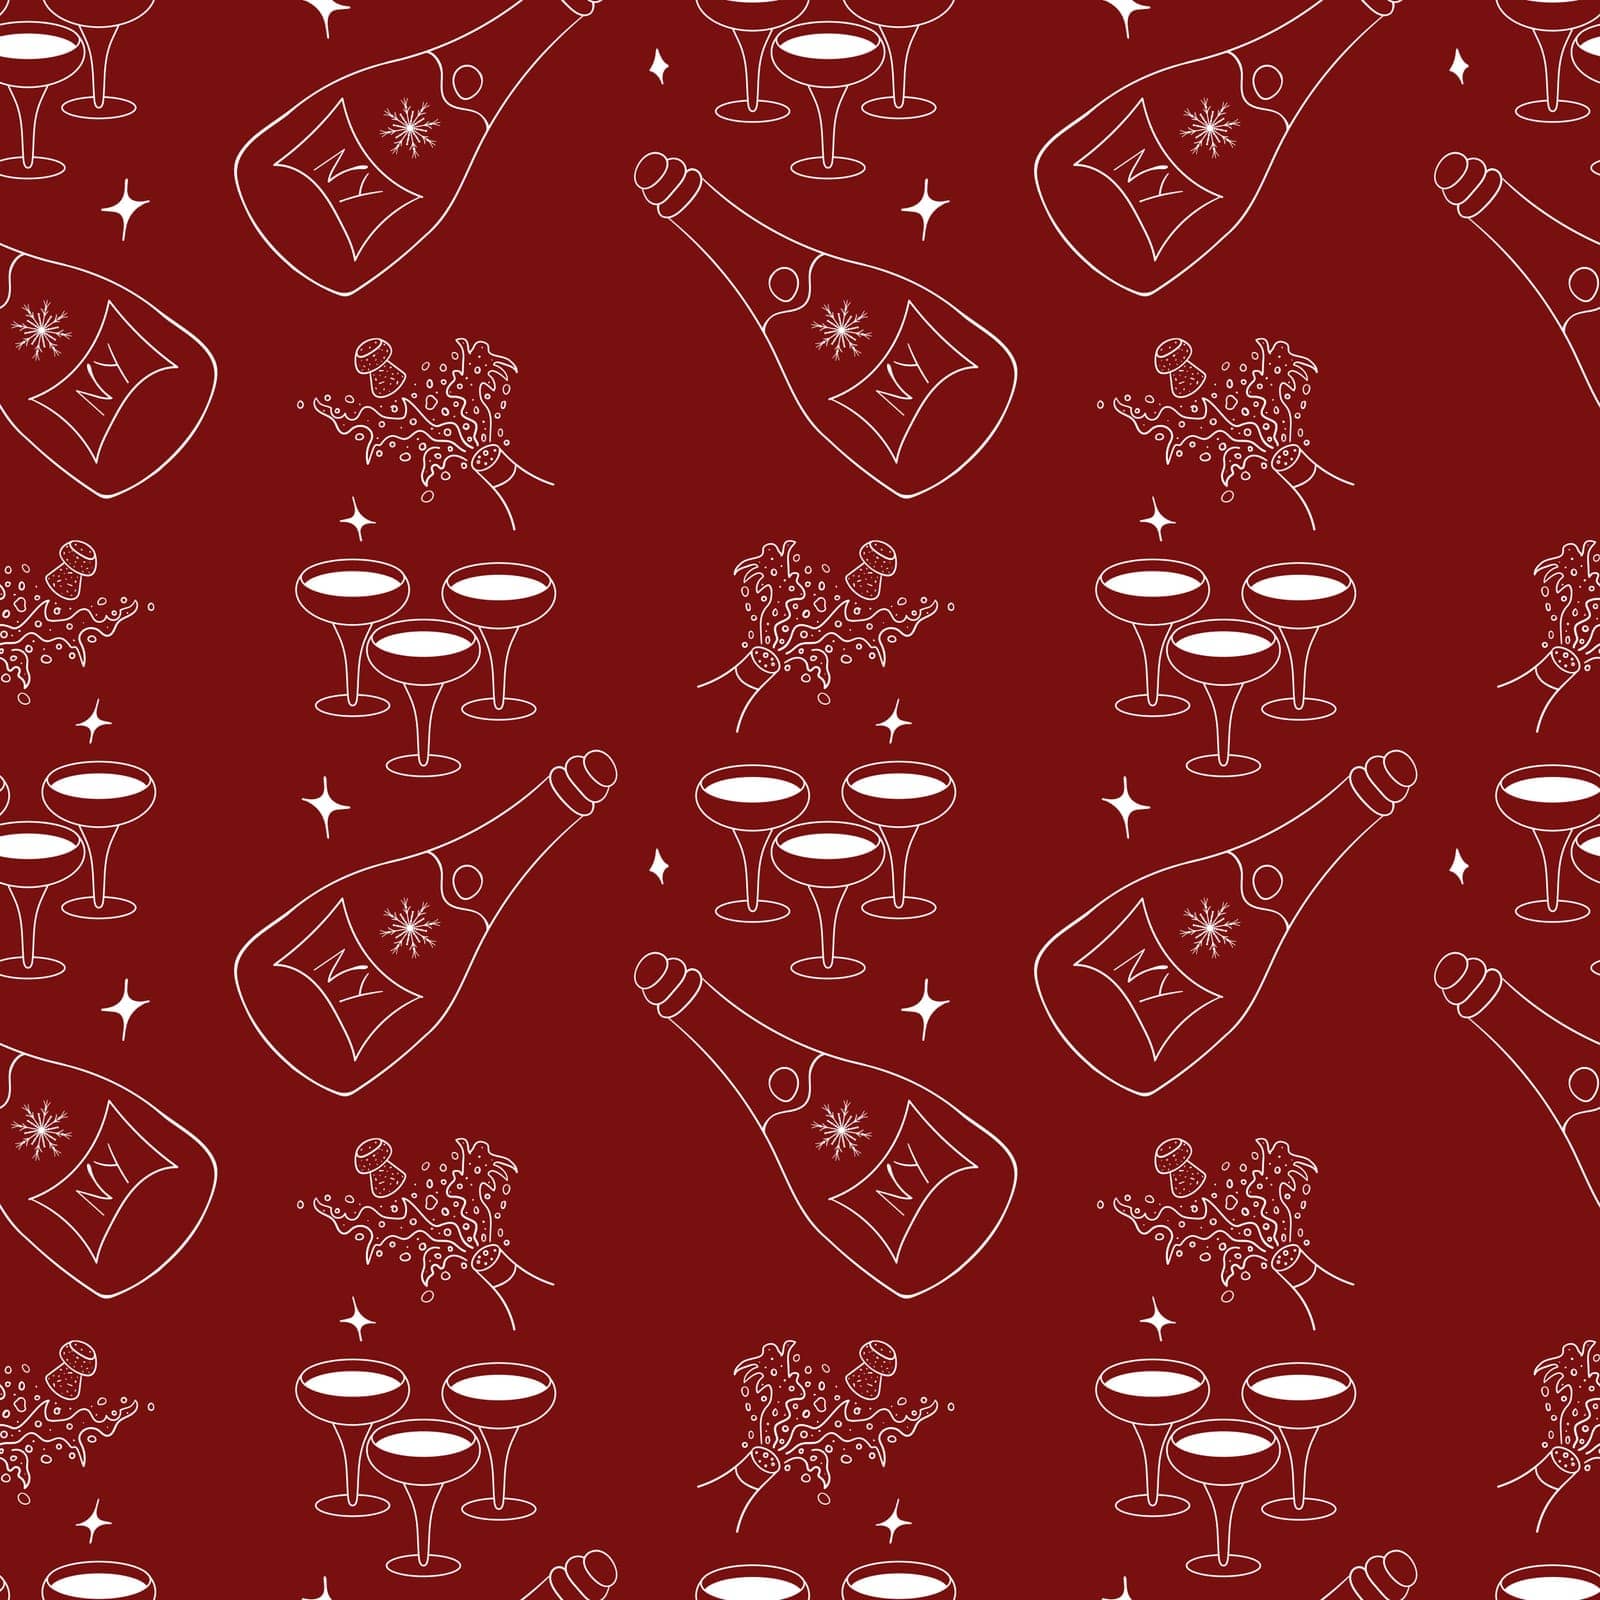 Seamless pattern with New Year s clipart. Hand drawn champagne bottleneck with foamy splashes and a flying cork, champagne bottle with label and snowflake, glasses with alcohol.